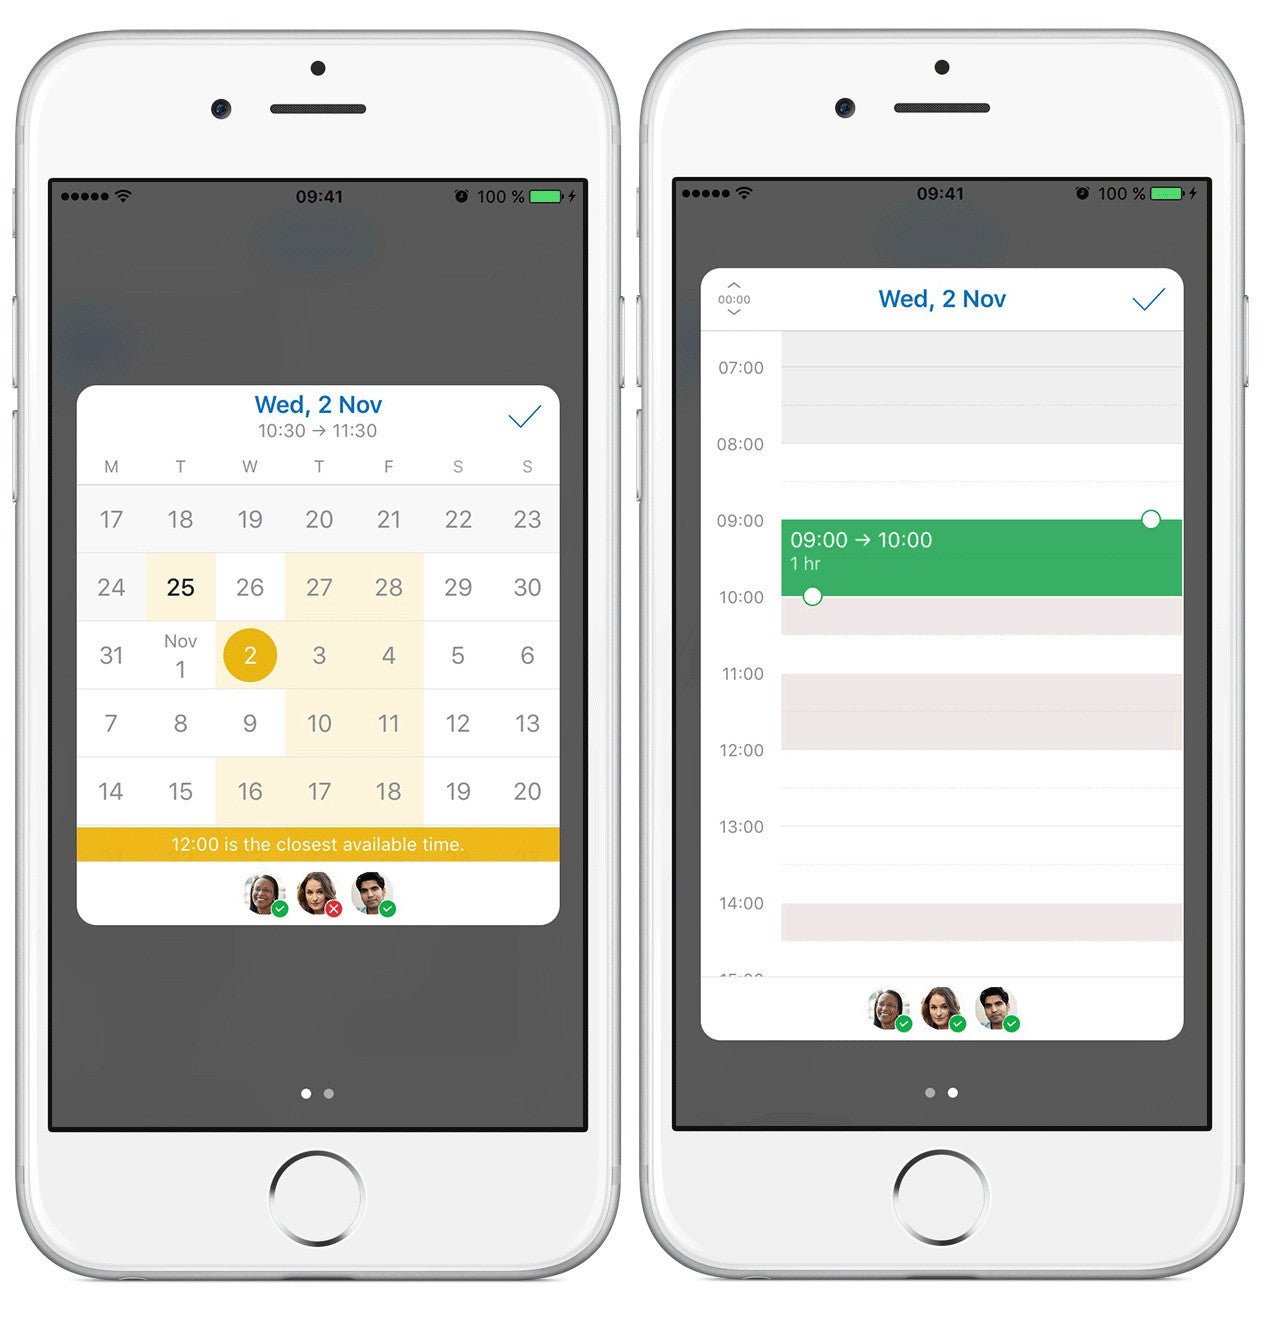 Outlook app for iOS now features a meeting scheduler to help plan your day